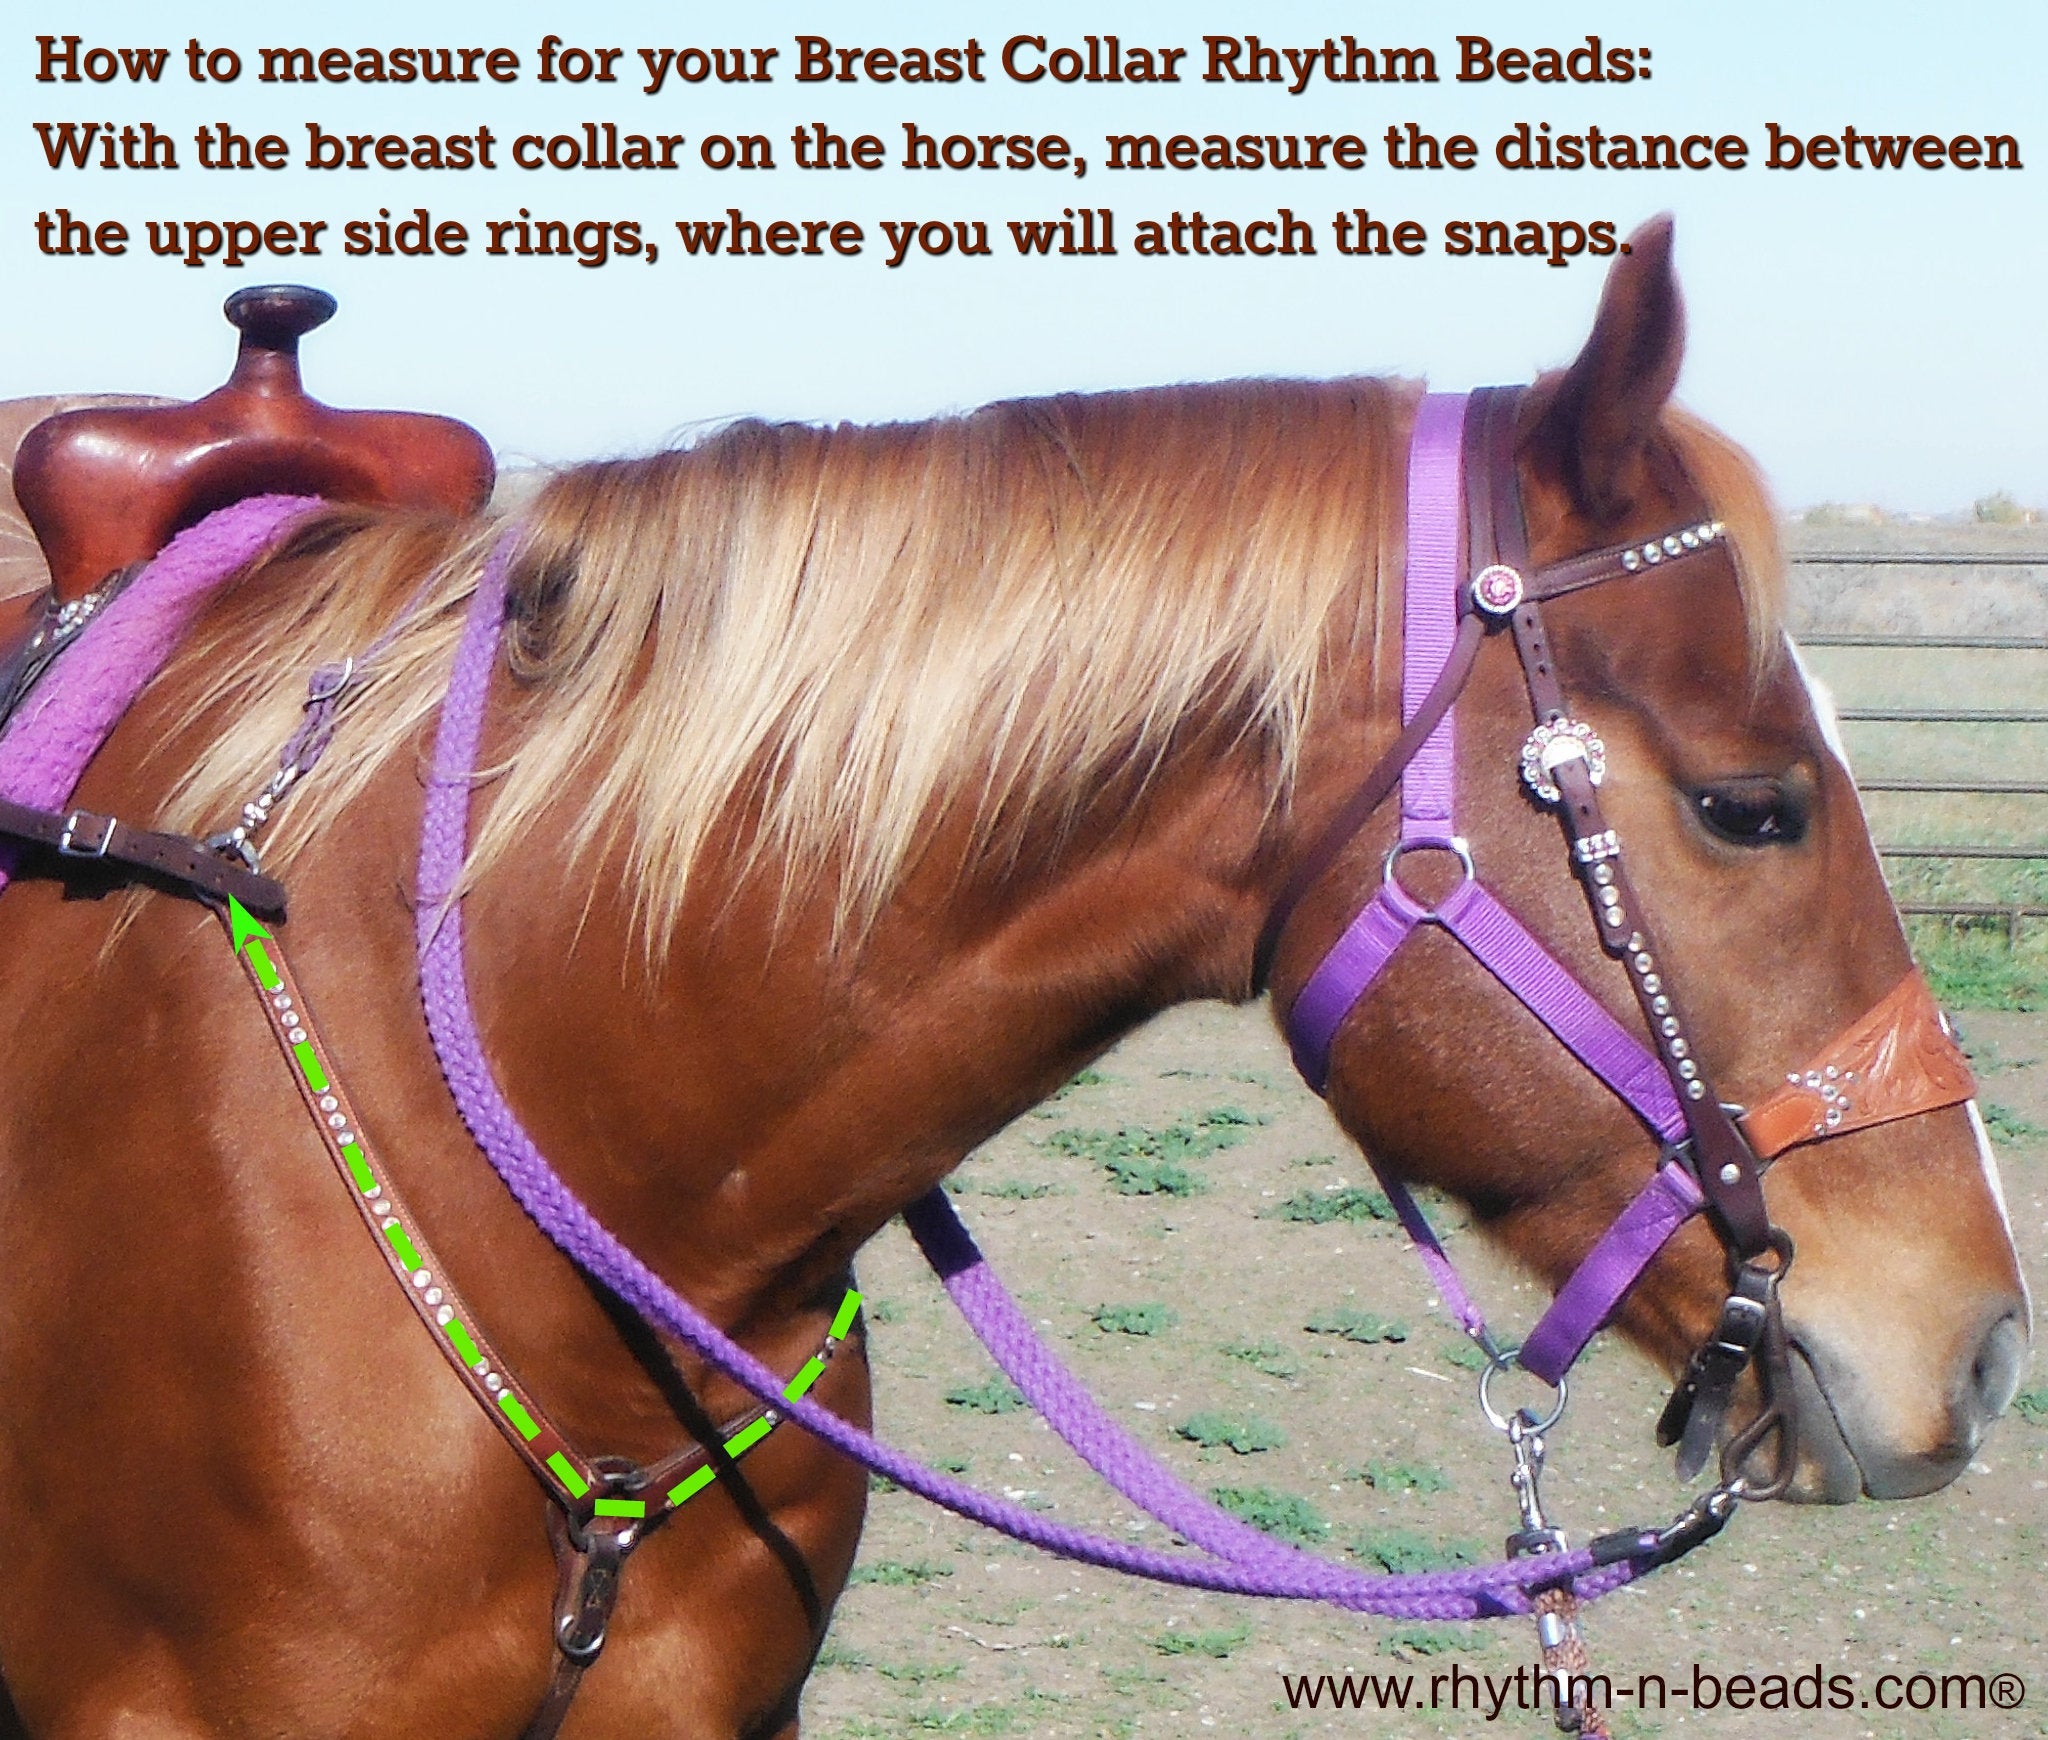 Breast Collar Rhythm Beads,PICK YOUR COLOURS, Trail Bells, Bear Bells, Rhythm Beads,Breast Plate Bells, Horse Necklace, Western Riding,